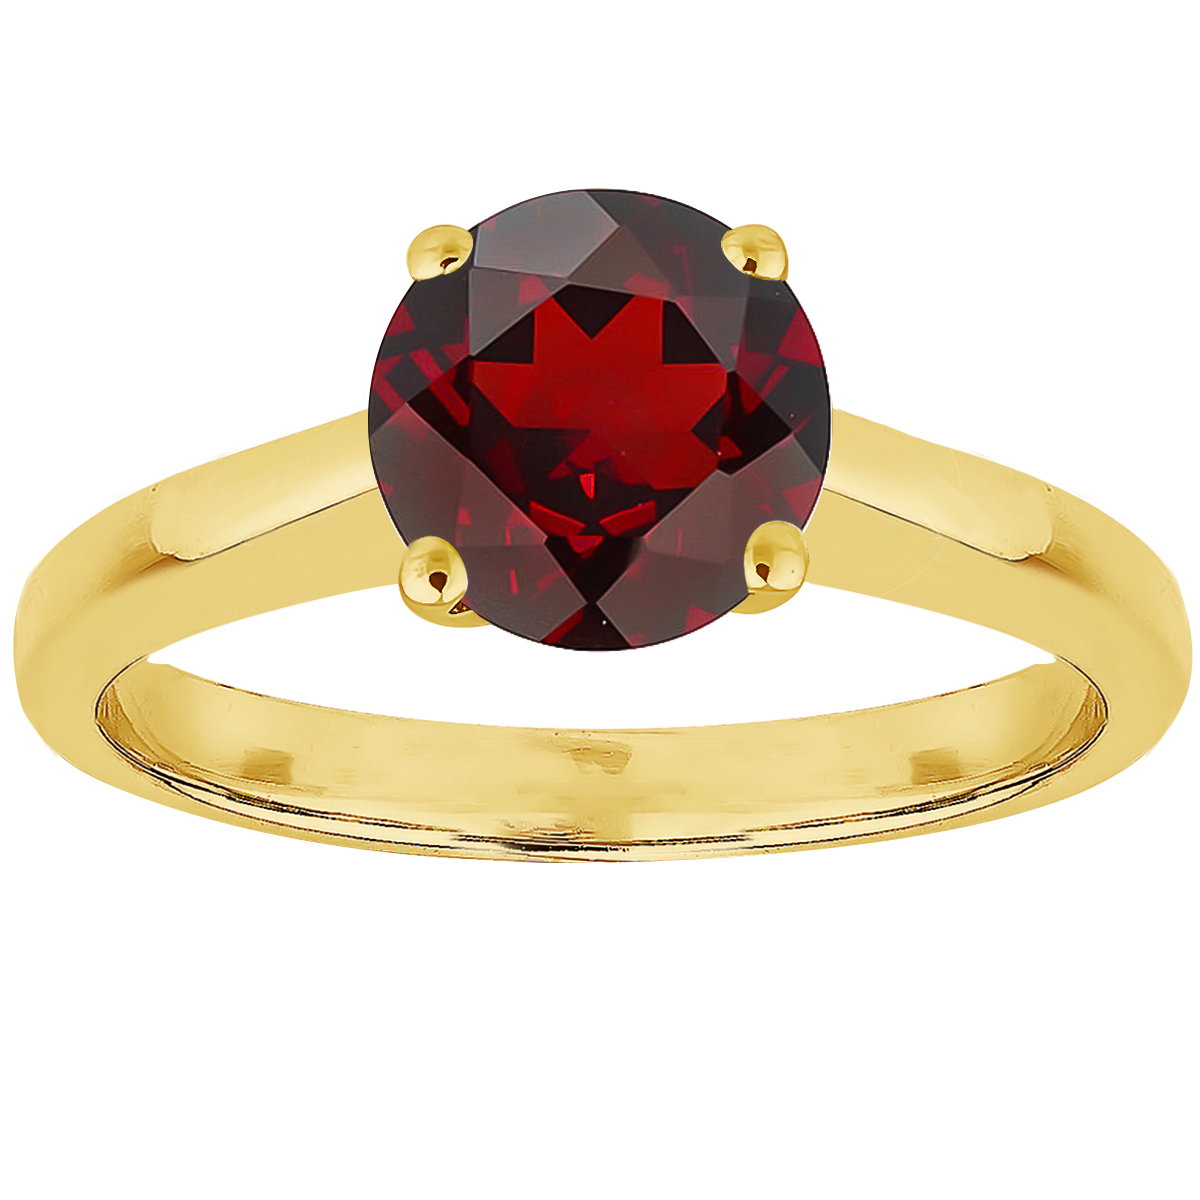 0.85ct Garnet Solitaire Engagement Ring in 9ct Yellow Gold.